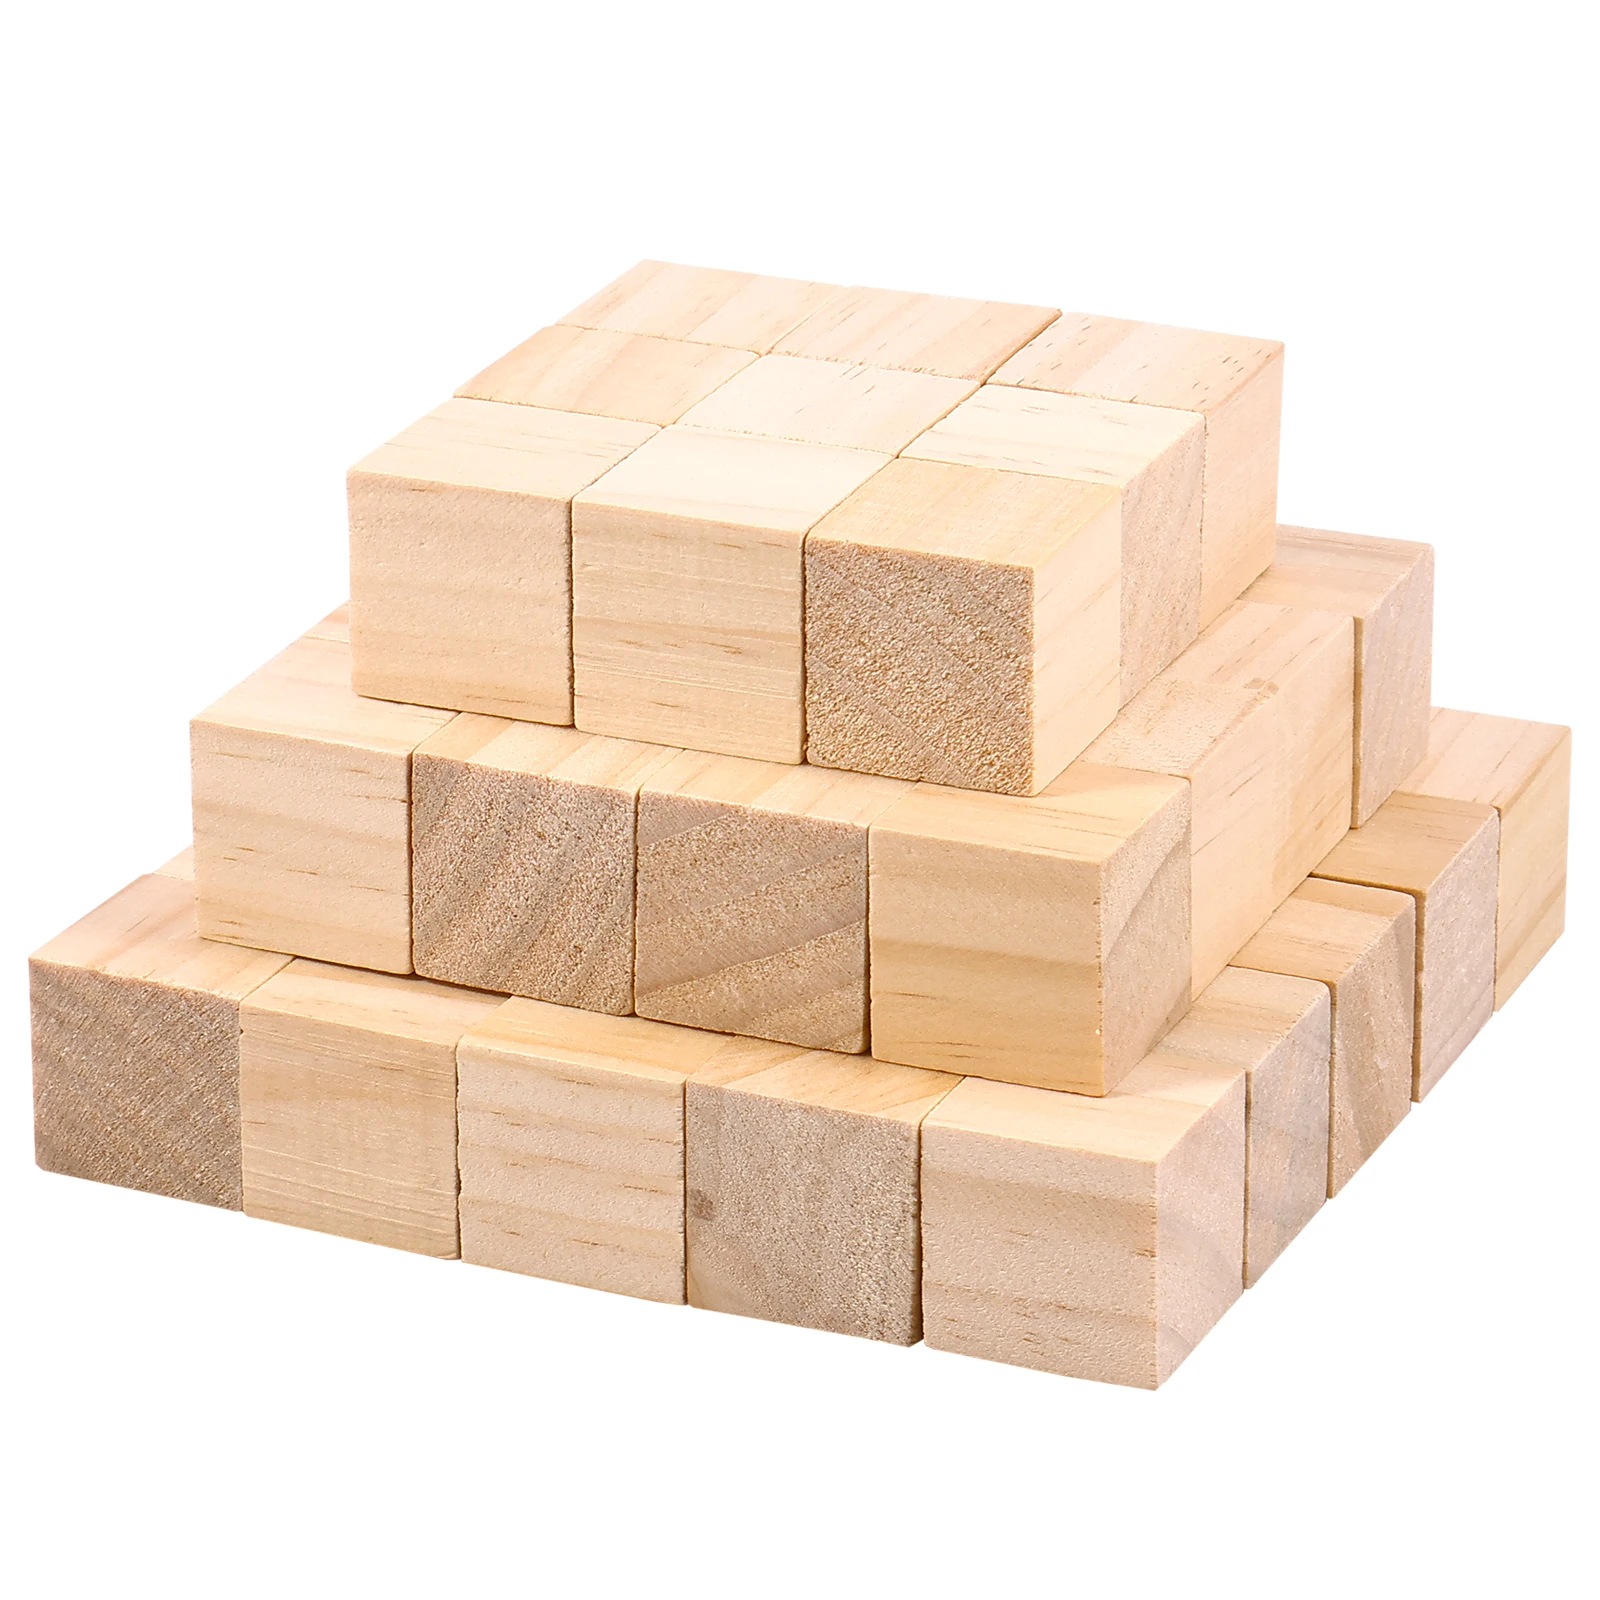 

50Pcs Wood Blocks for Crafts Pine Wood Square Blocks 1 Inch Unfinished Wood Craft Cubes Natural Wooden Blocks Wooden Cubes for